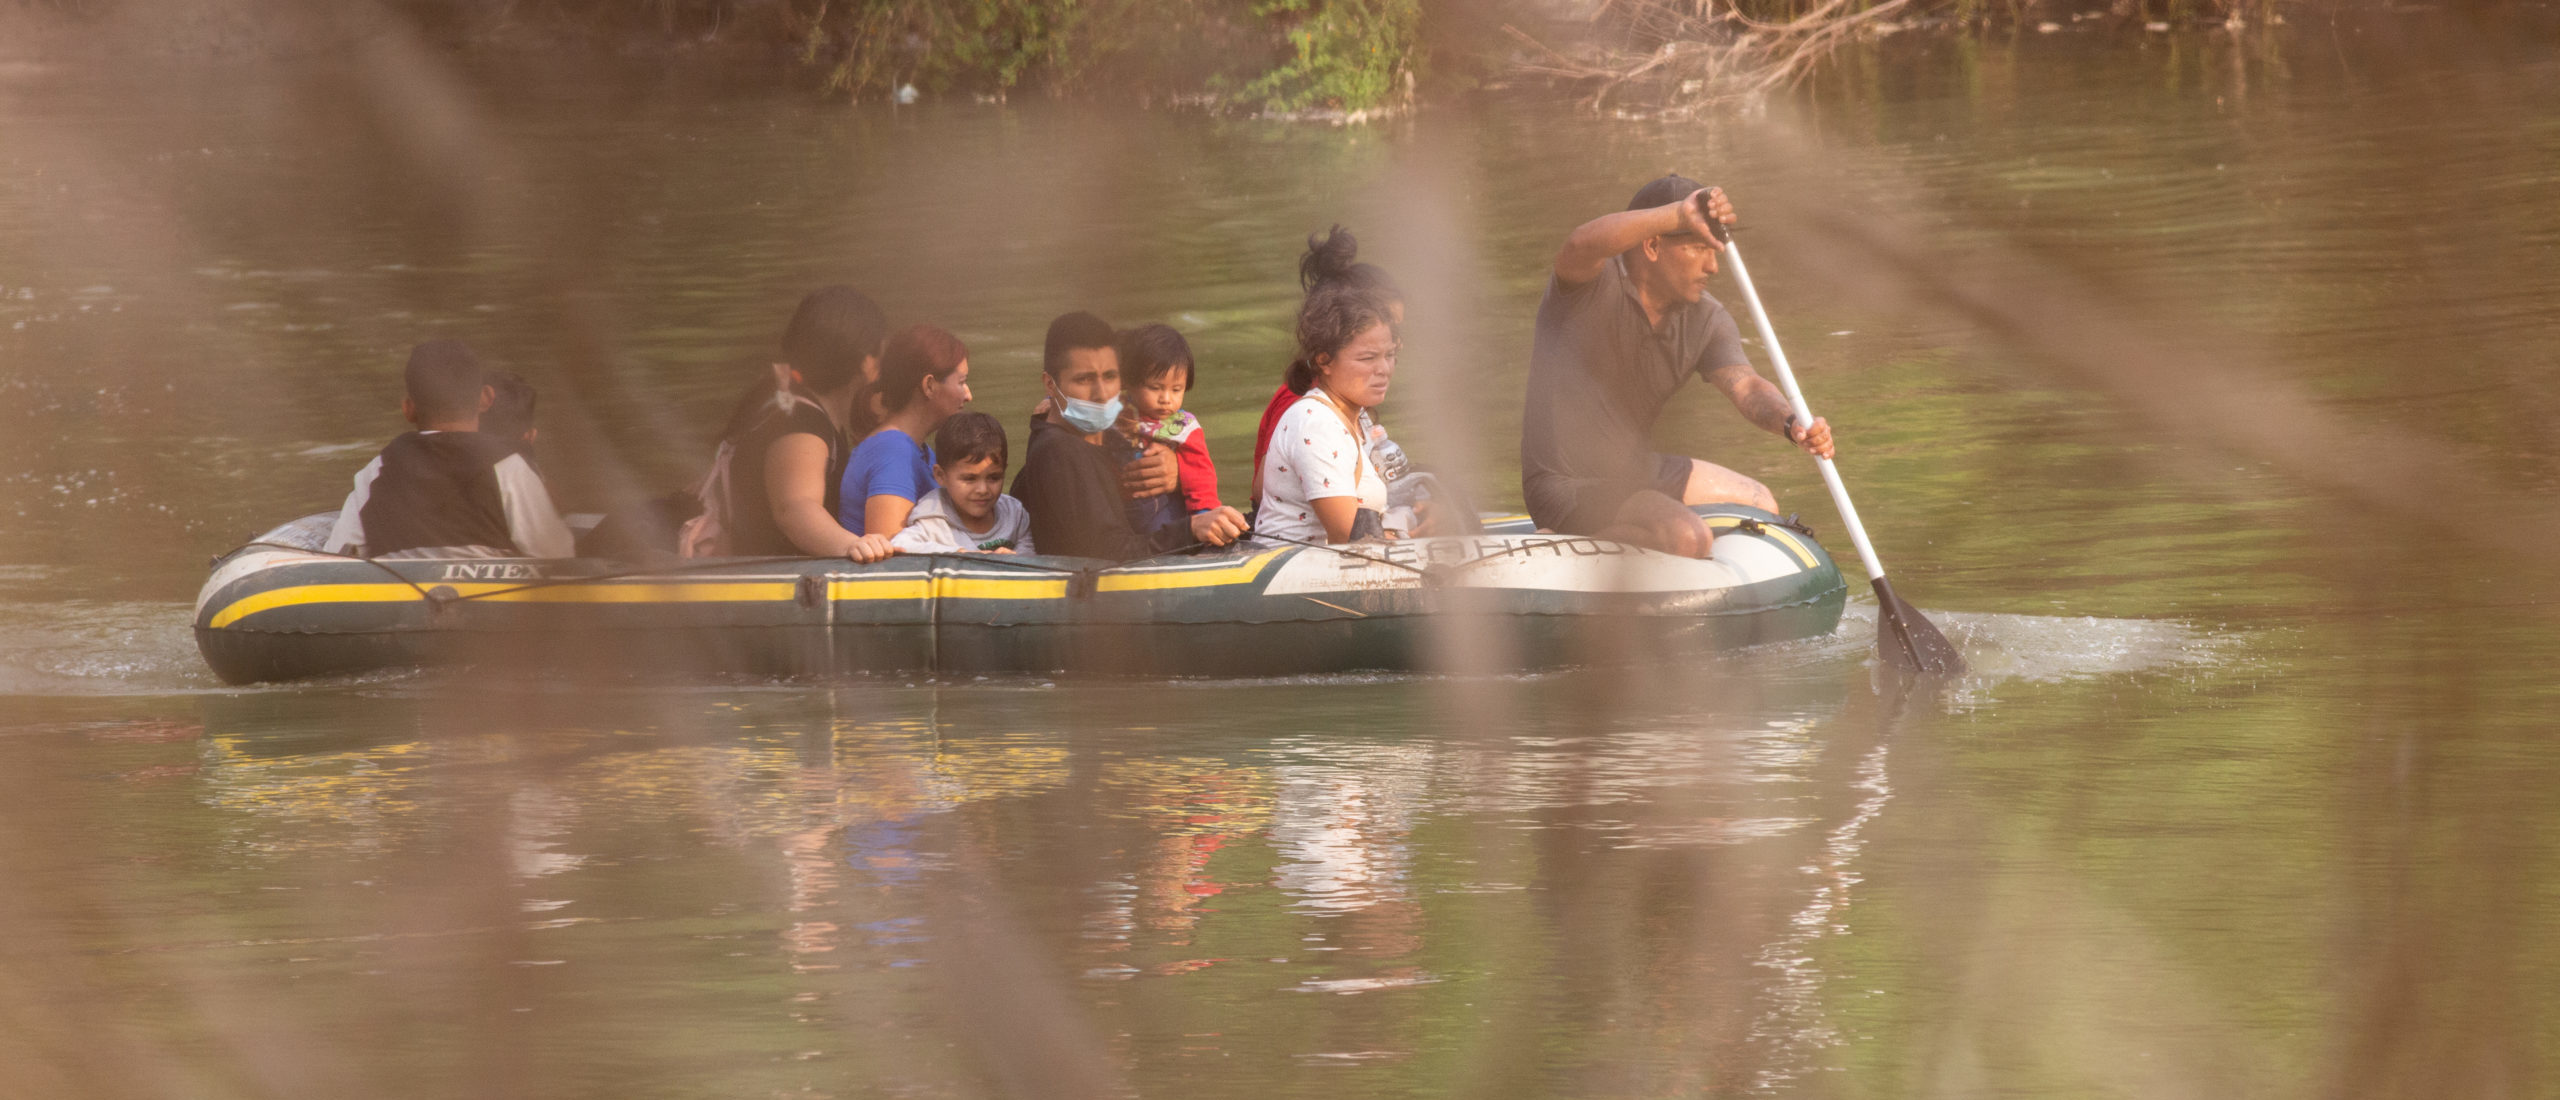 Smugglers use an inflatable raft to transport migrants across the Rio Grande River near McAllen, Texas, on March 24, 2021. (Kaylee Greenlee. - Daily Caller News Foundation)